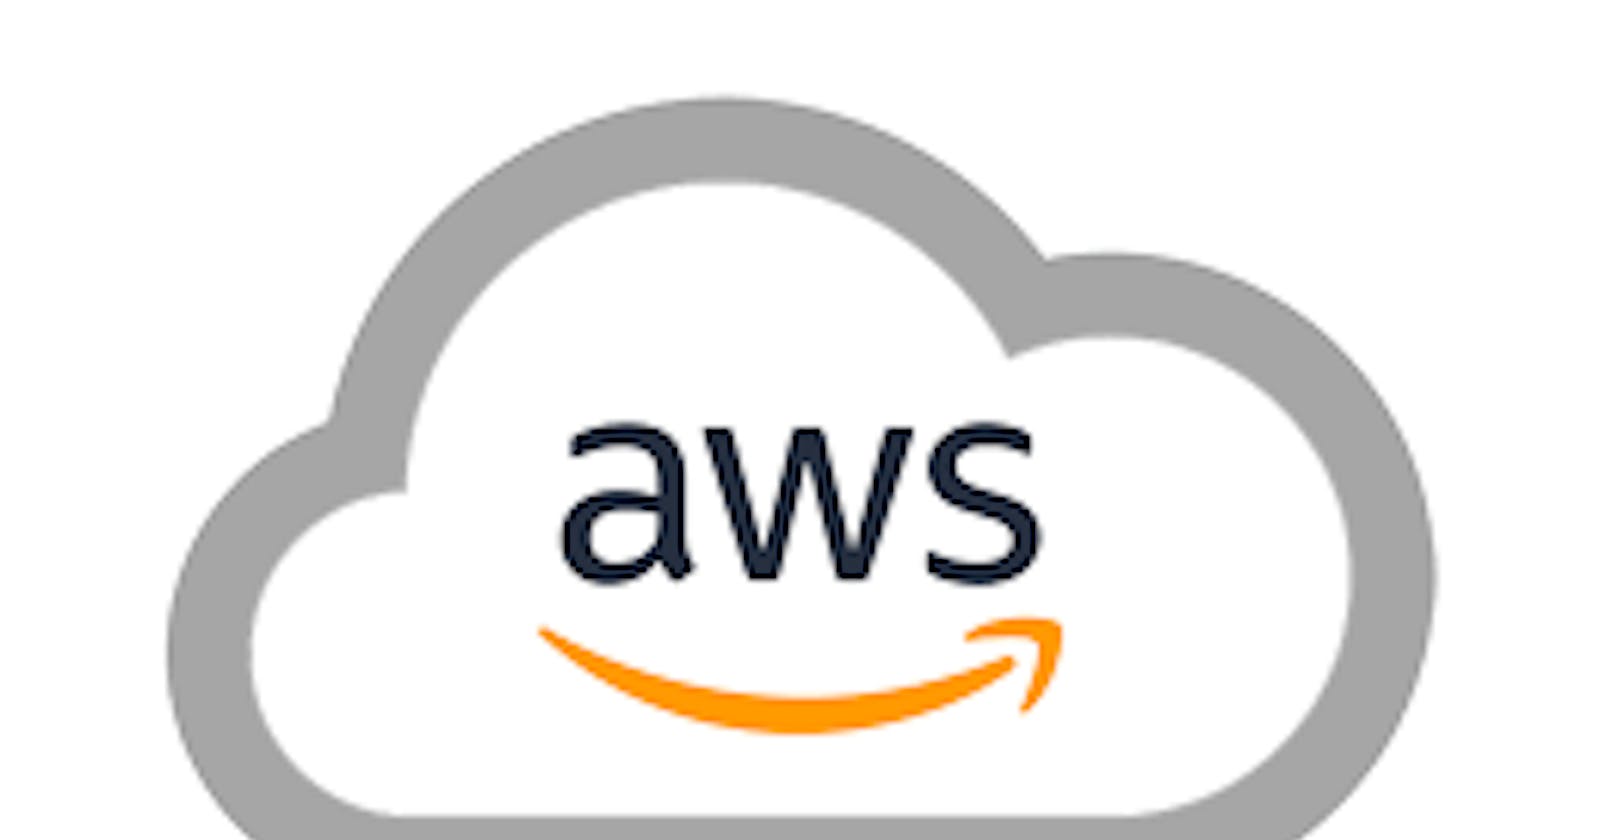 How to ace the AWS Certified Cloud practitioner exam